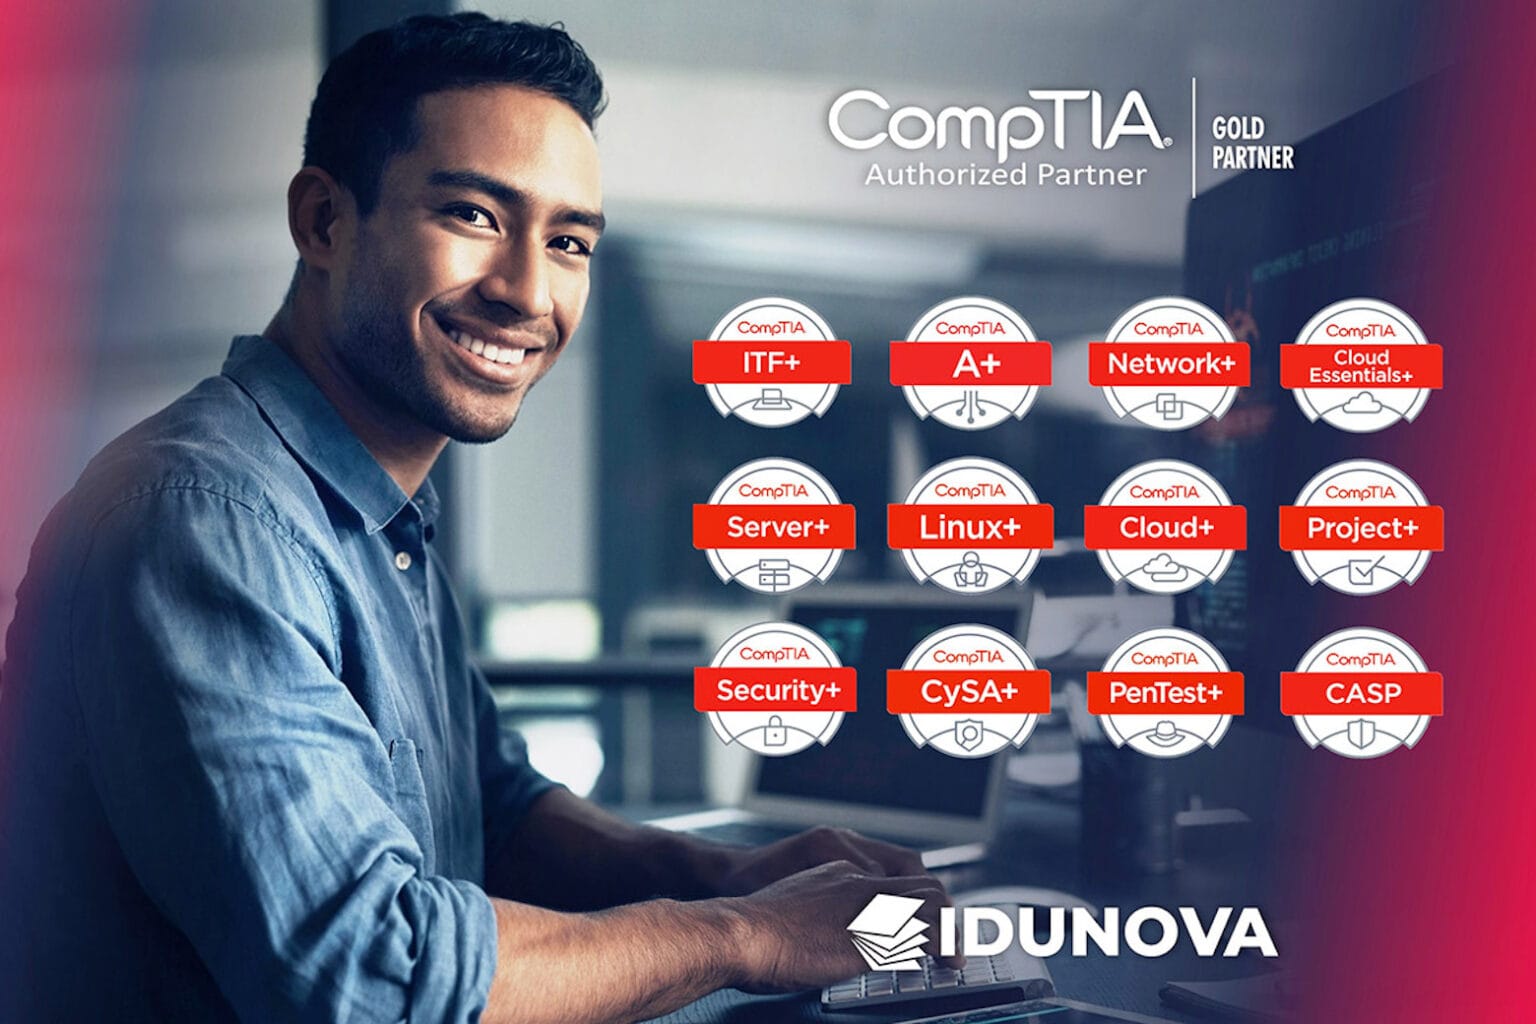 This collection of CompTIA courses offers 262 hours of IT training for $64.97.